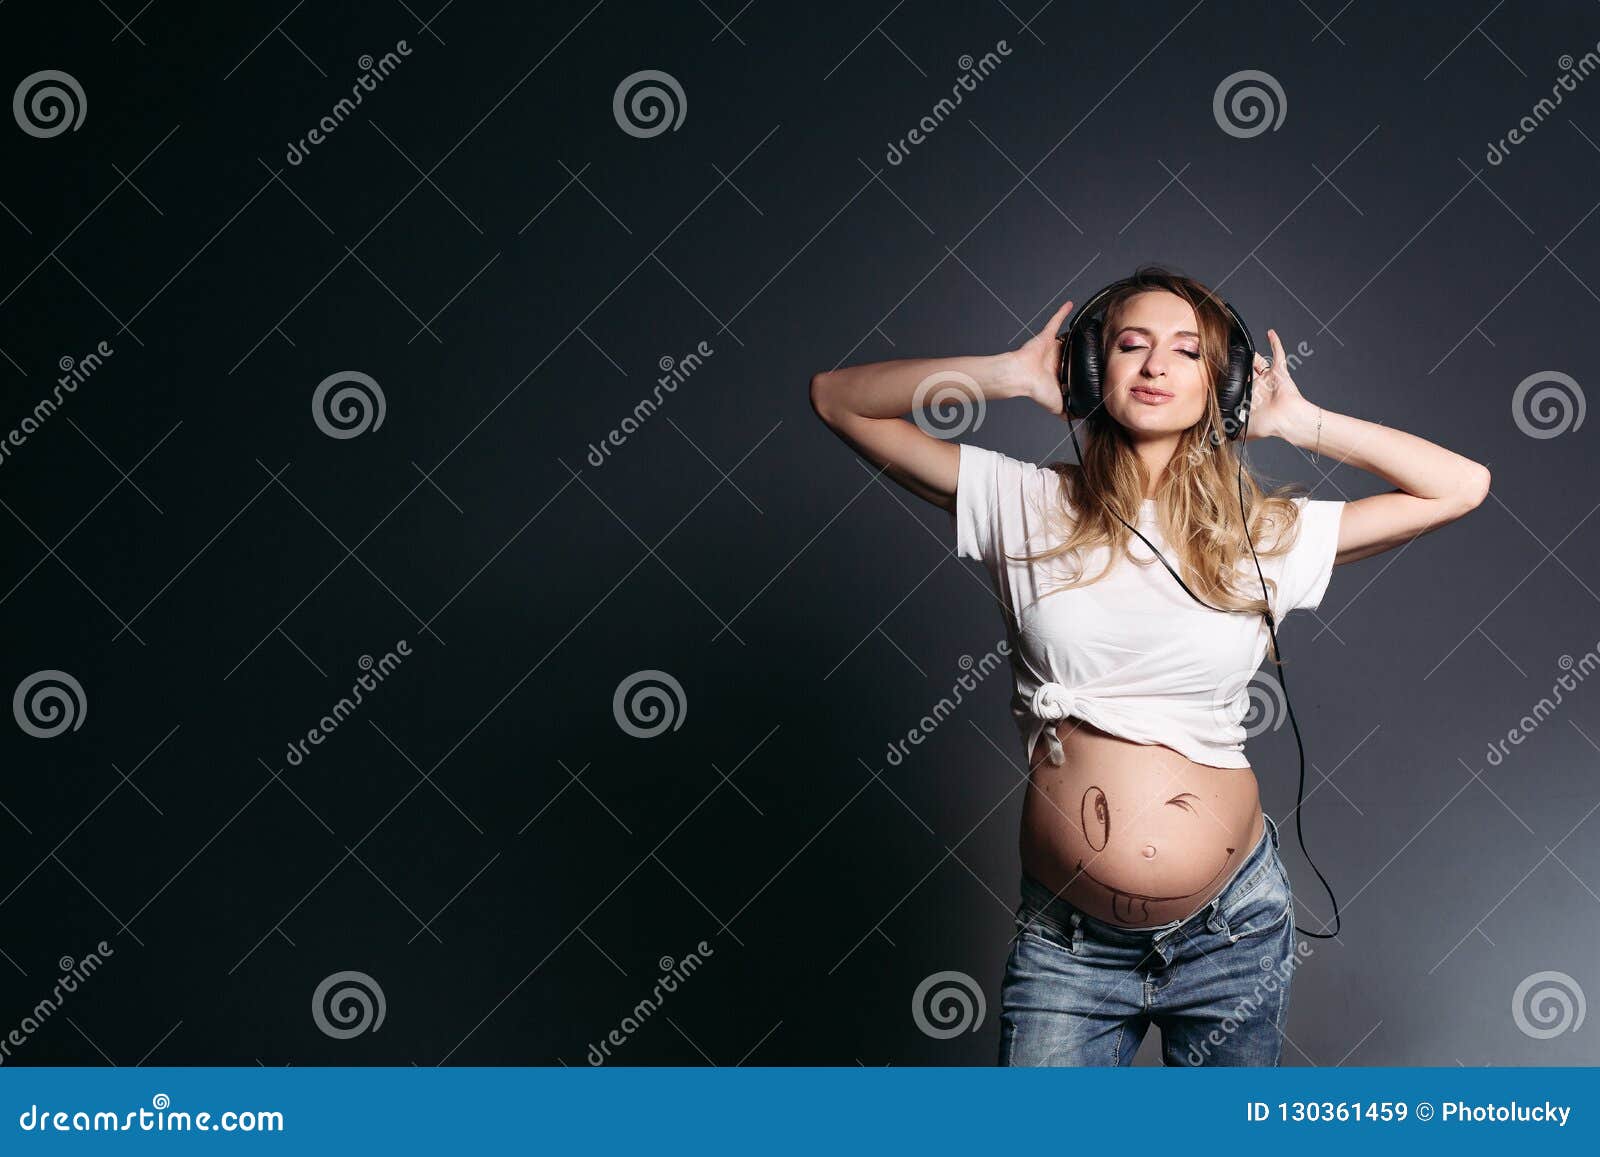 Pregnant Woman Dancing and Smiling with Closed Eyes. Stock Image - Image of  posing, cute: 130361459